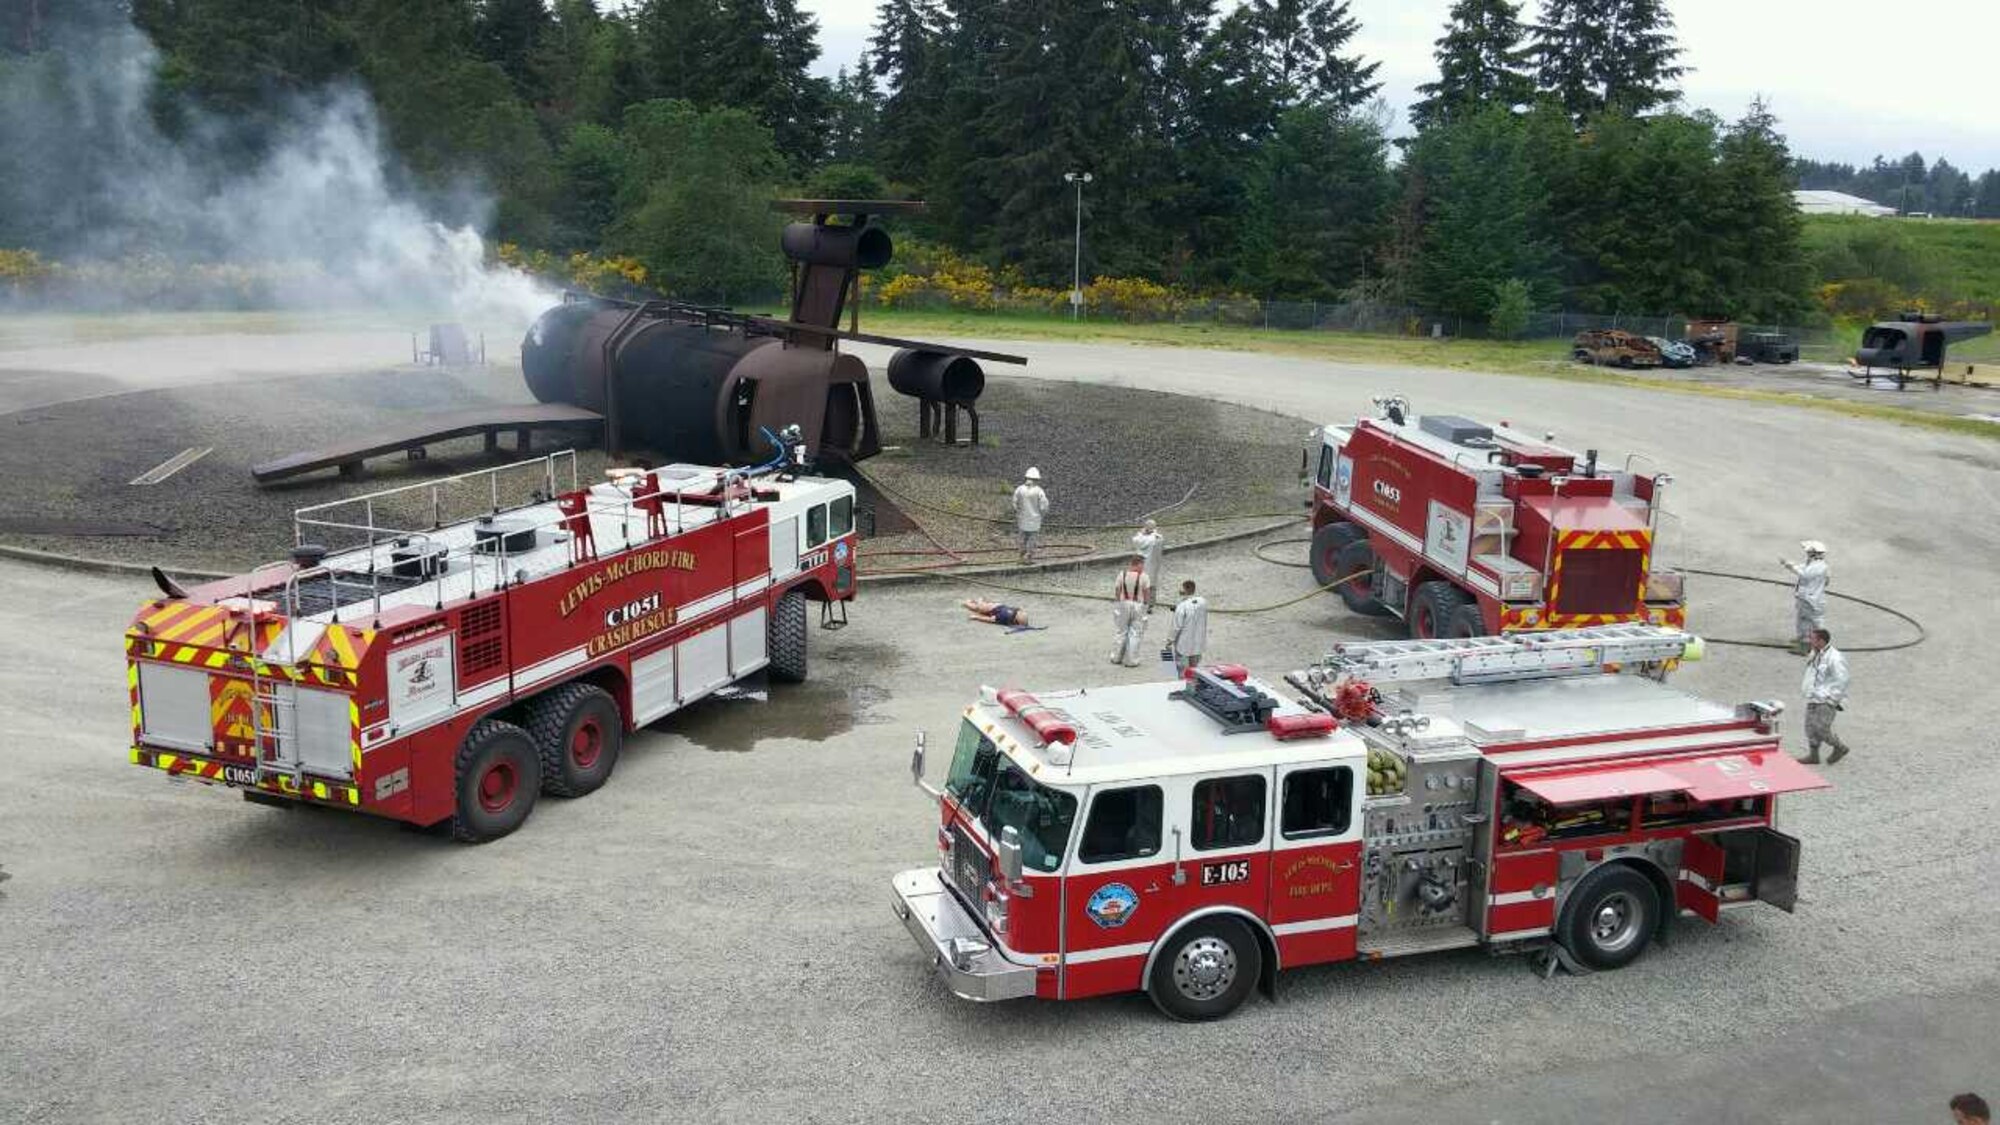 U.S. Air Force Reserve Firefighters, assigned to the 446th Civil Engineer Squadron, combat interior fires on a mock aircraft May 15, 2016, at Joint Base Lewis-McChord. Citizen Airmen participated in a two-day exercise consisting of fire suppression, search and rescue, and victim egress training. (U.S. Air Force Reserve photo by Tech. Sgt. Scott Matthews)